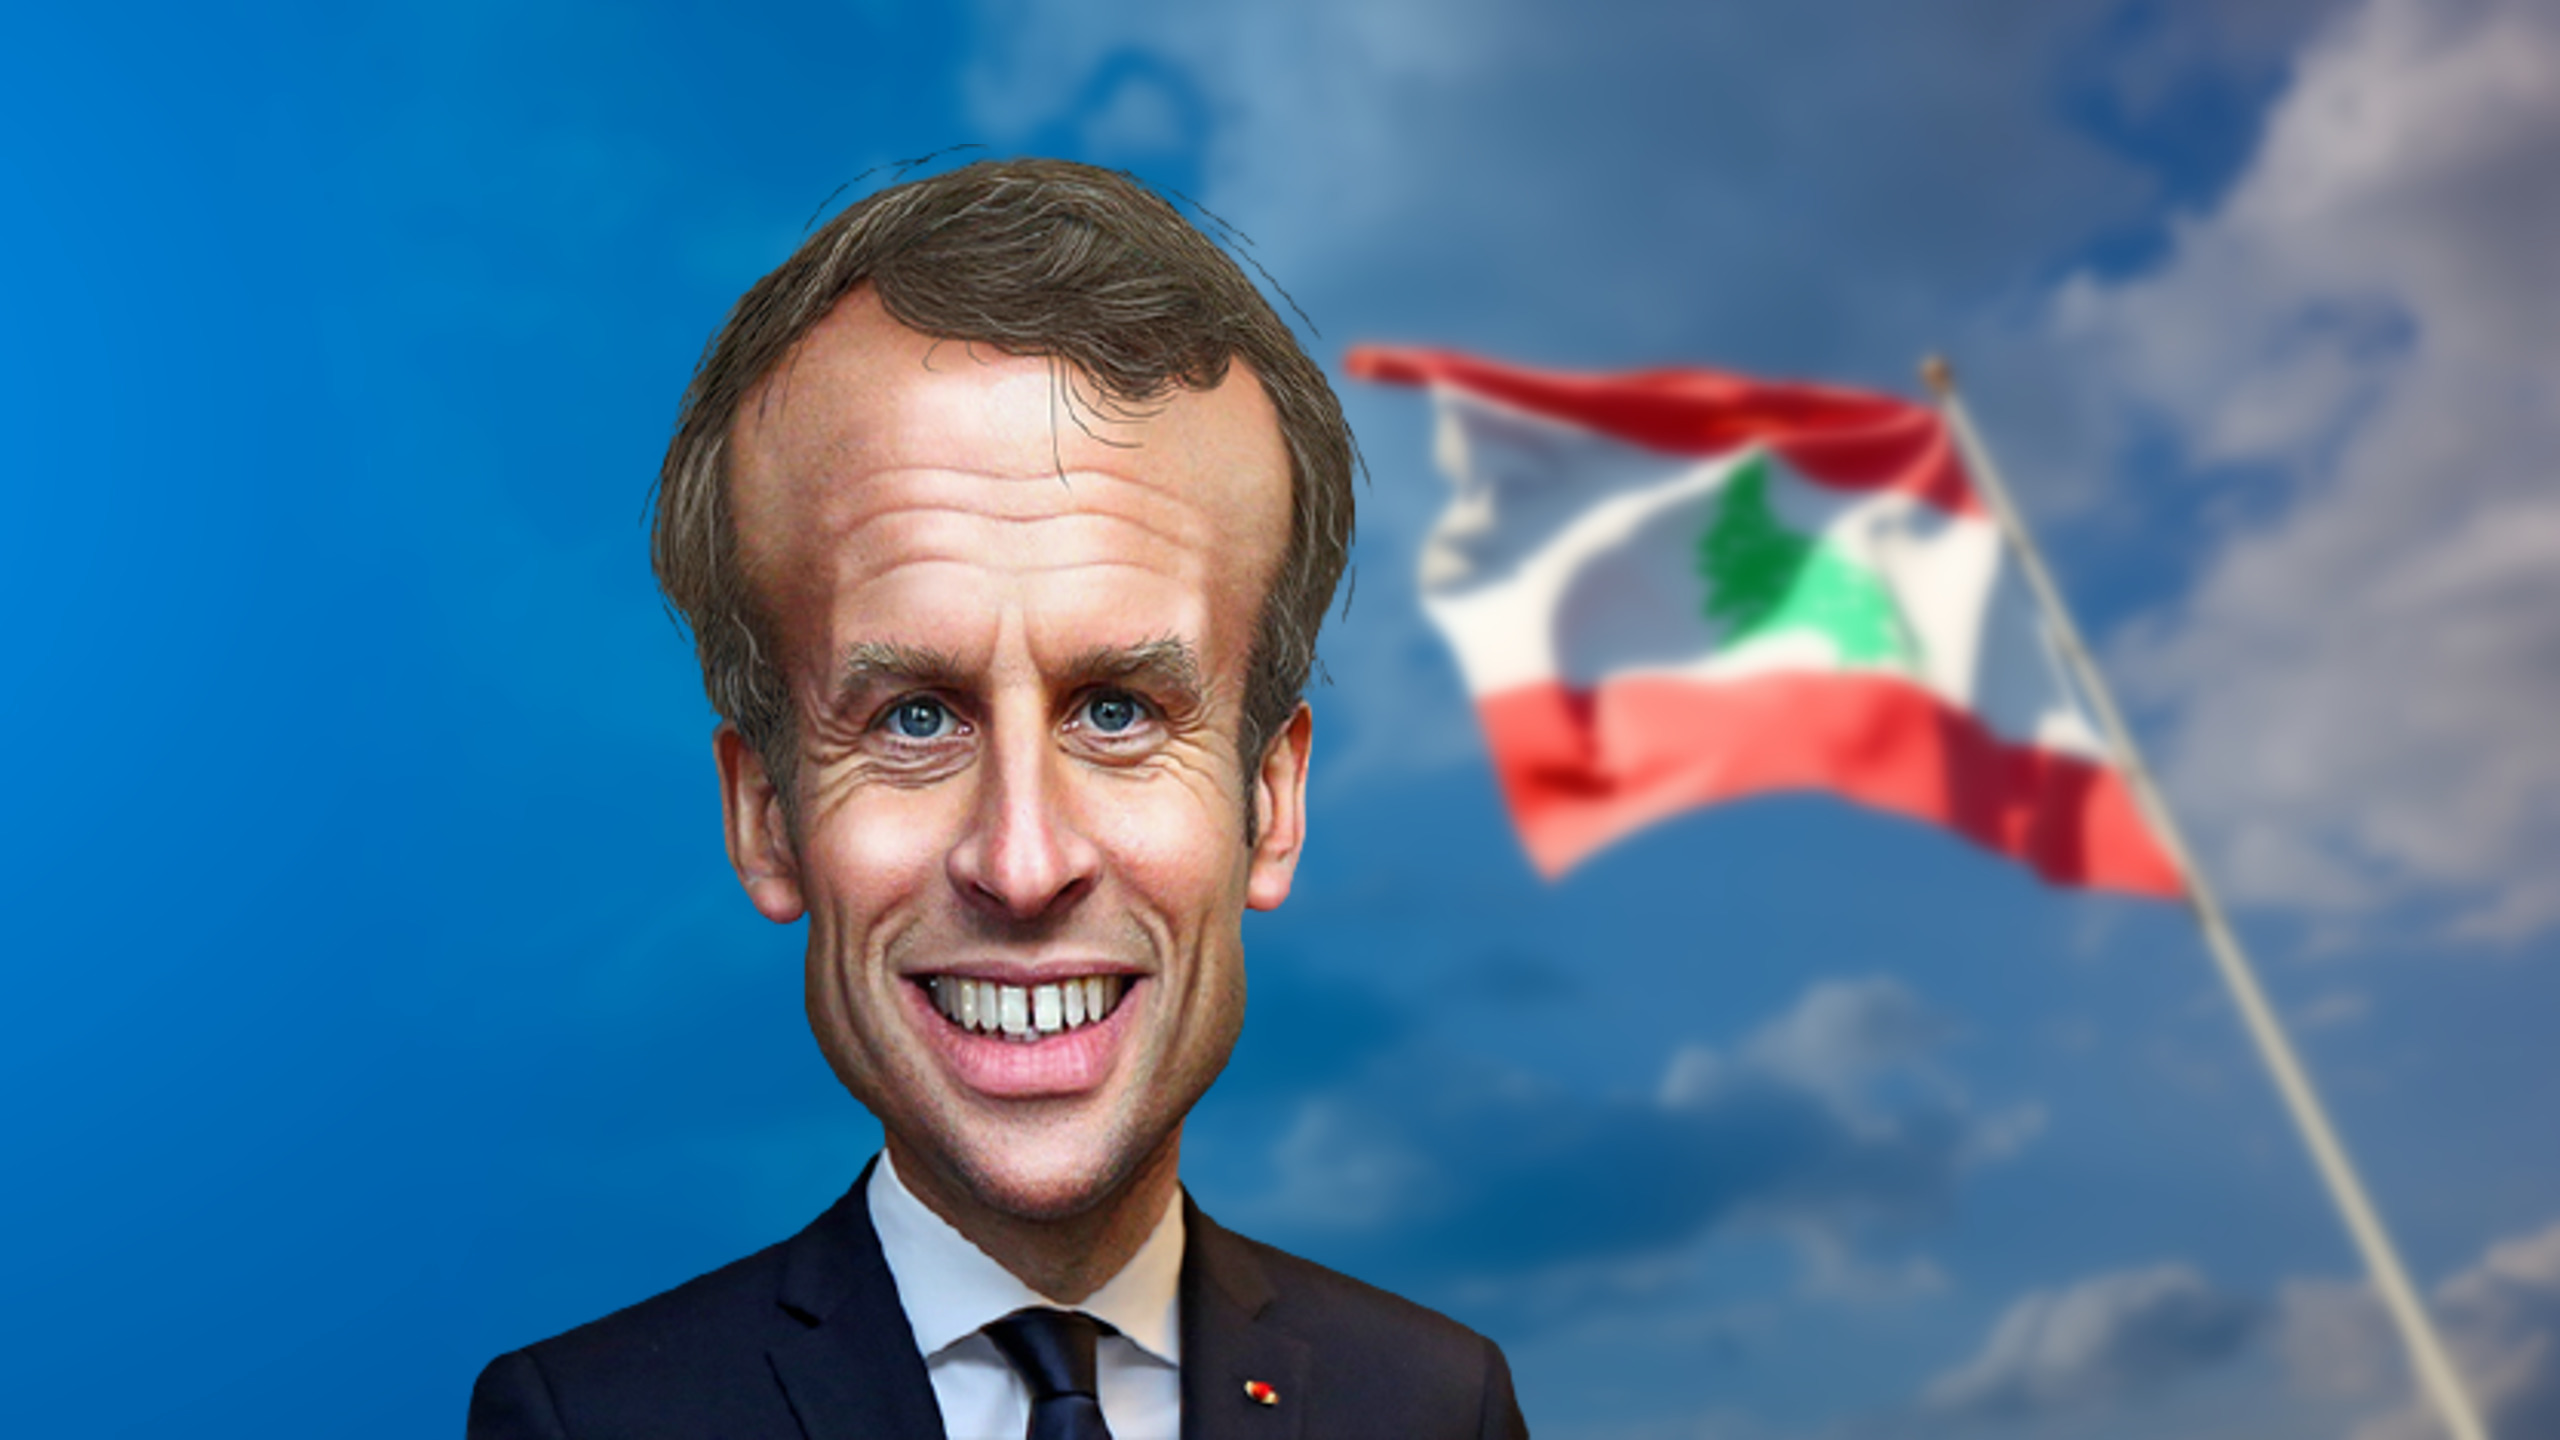 Macron Heads Aid Conference for Lebanon